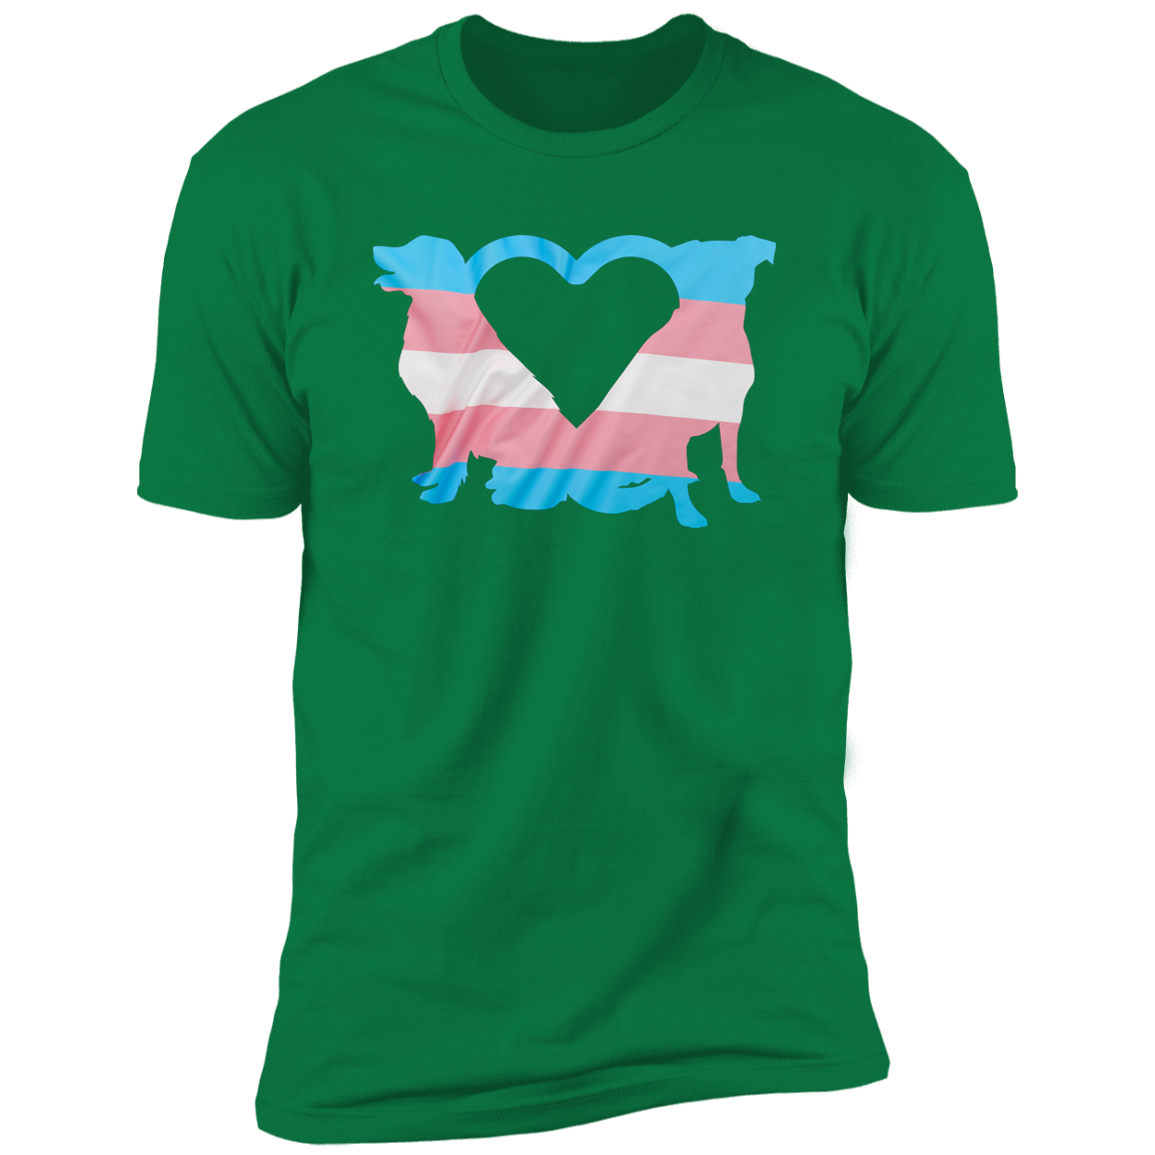 Trans Pride Dogs Heart Pride T-shirt, Trans Pride Dog Shirt for humans, in kelly green